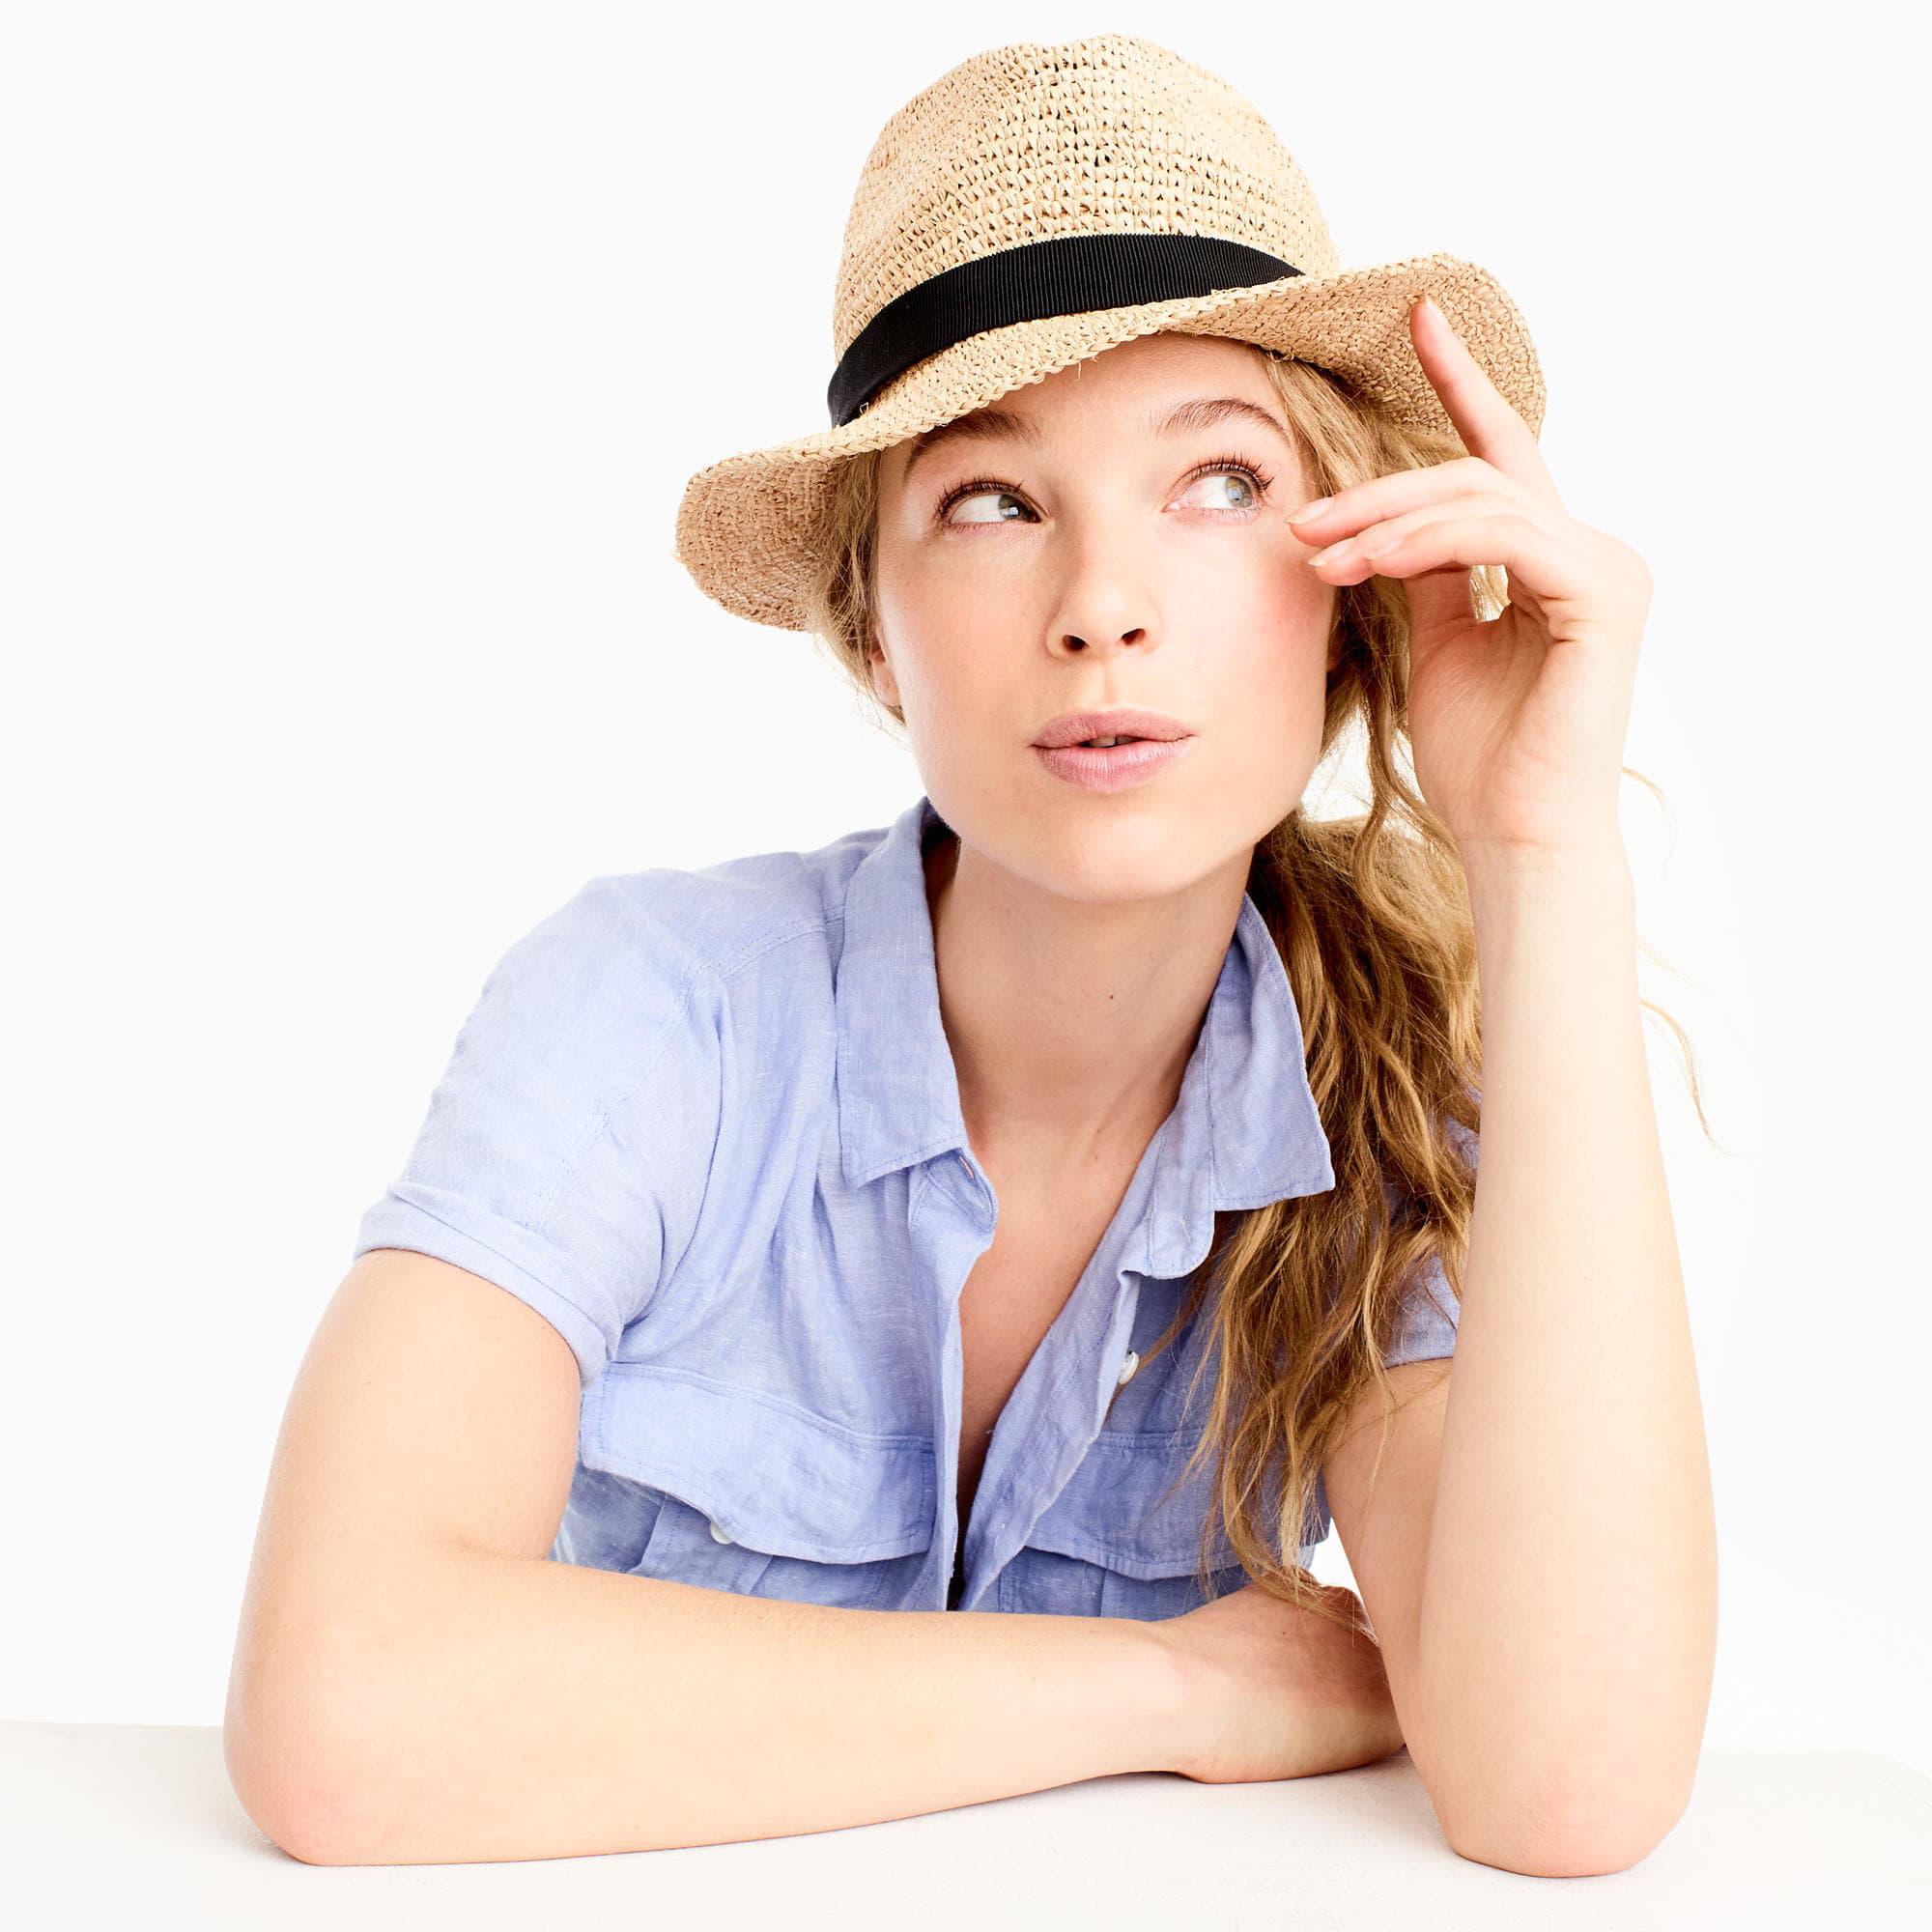 Lyst - J.Crew Packable Straw Hat in Natural